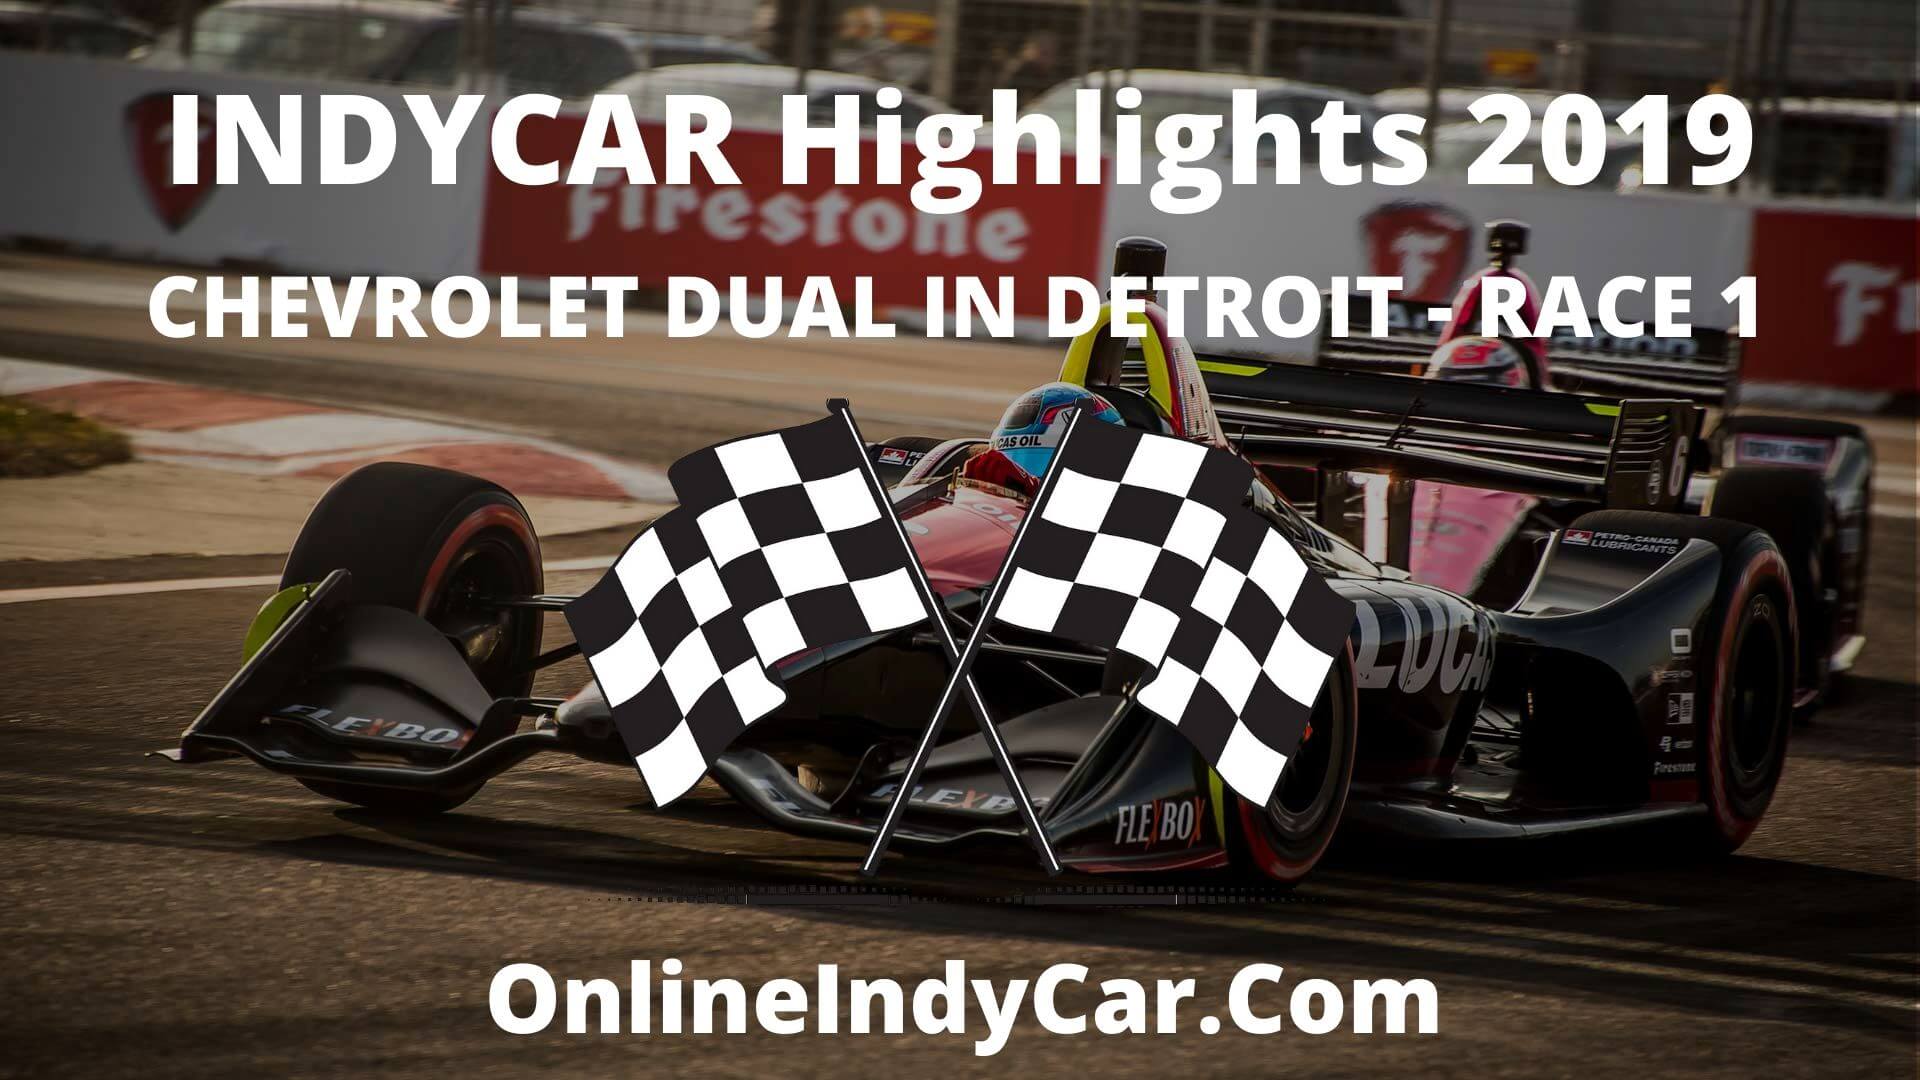 Chevrolet Dual In Detroit Race 1 Highlights 2019